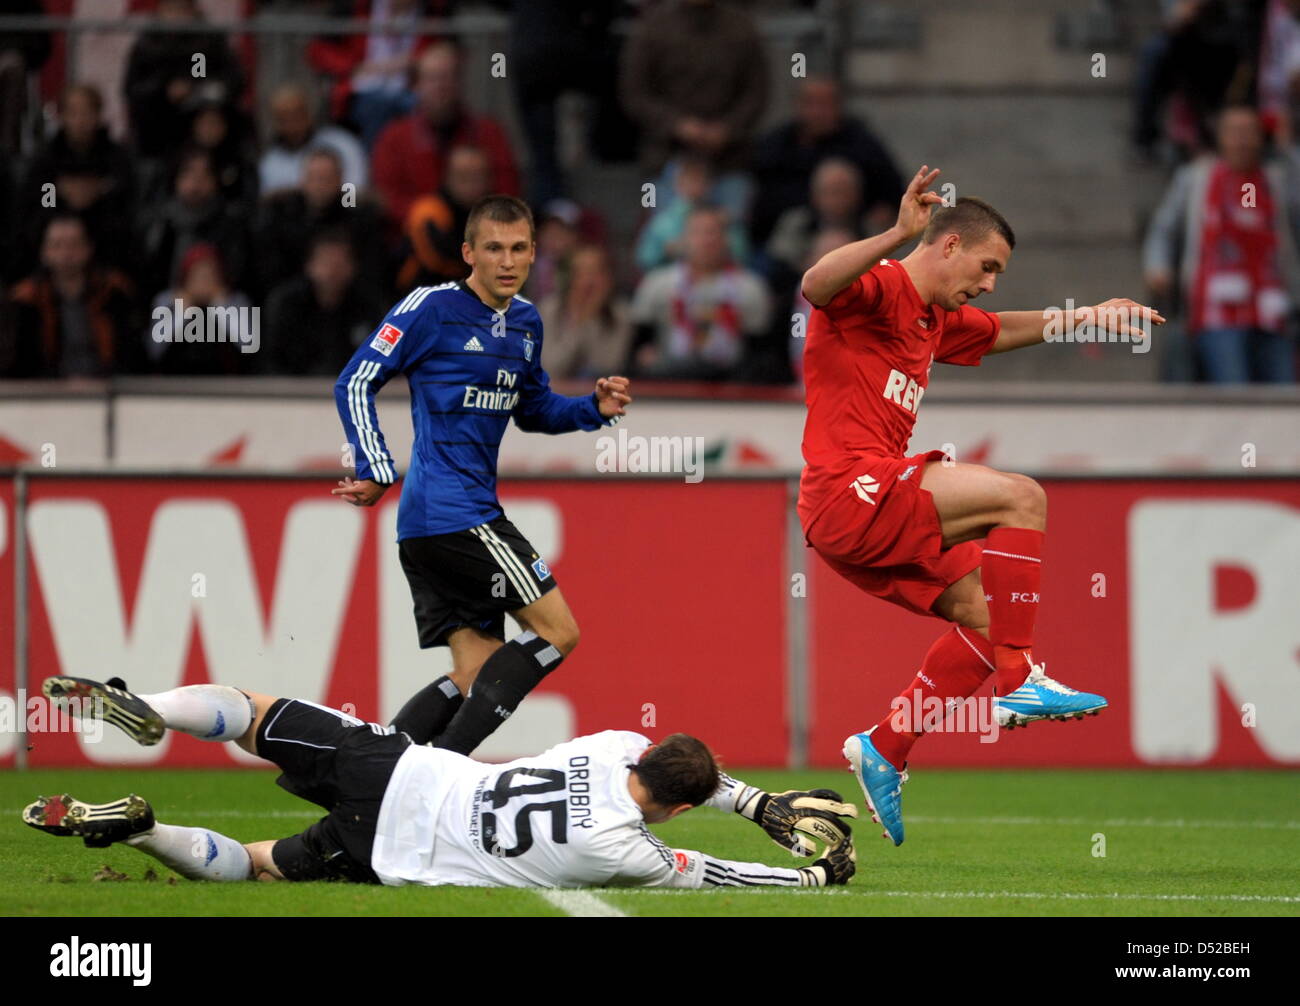 Cologne's Lucas Podolski (r) tackles Jaroslav Drobny and Robert Tesche from Hamburg during a German Bundesliga match at the RheinEnergie stadium in Cologne, Germany, 30 October 2010. Cologne won by 3-2. Photo: Federico Gambarini Stock Photo